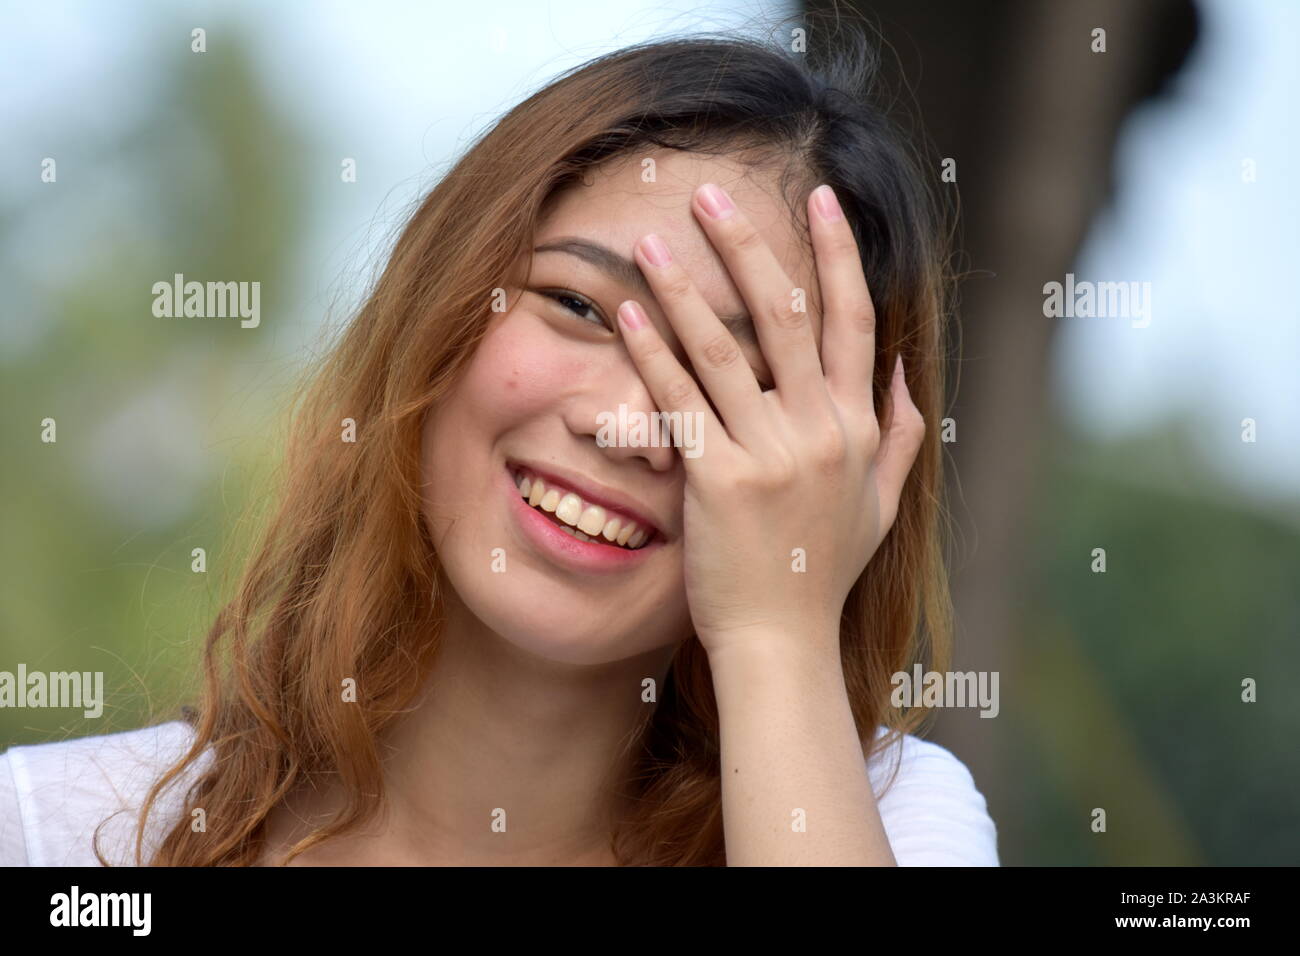 Laughing Asian Female Stock Photo